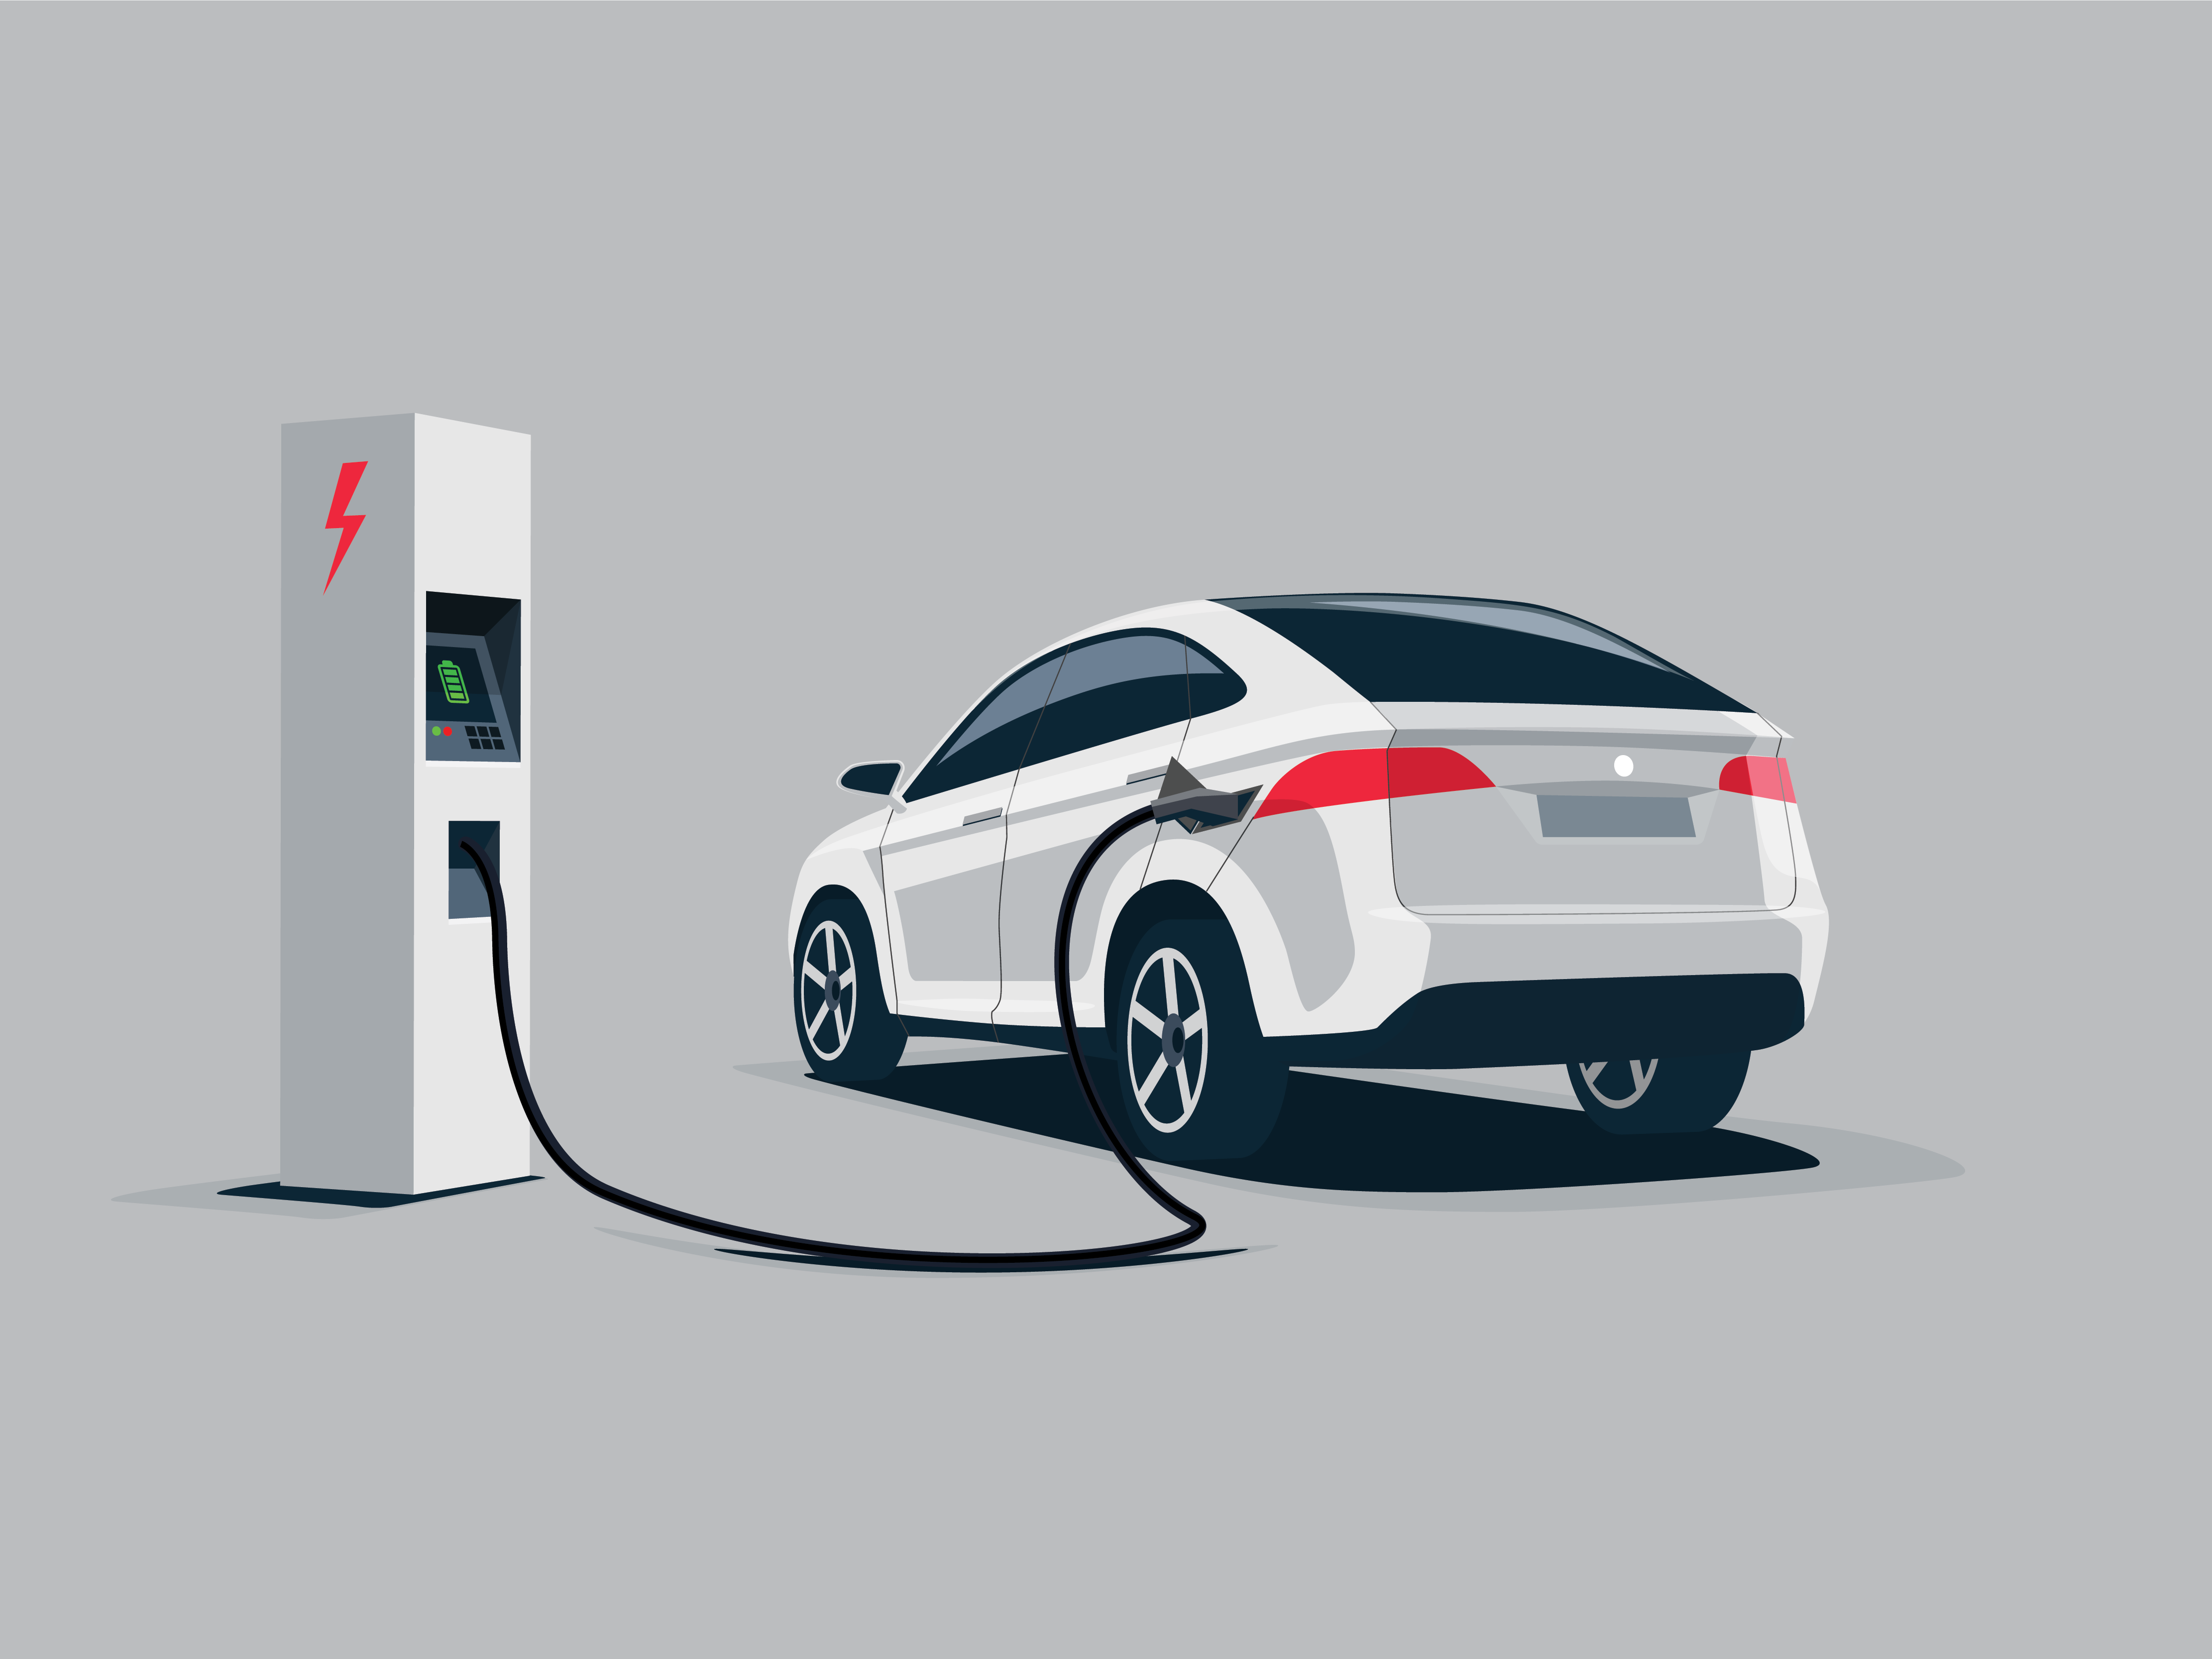 Constitutional challenge: Can states tax electric cars?